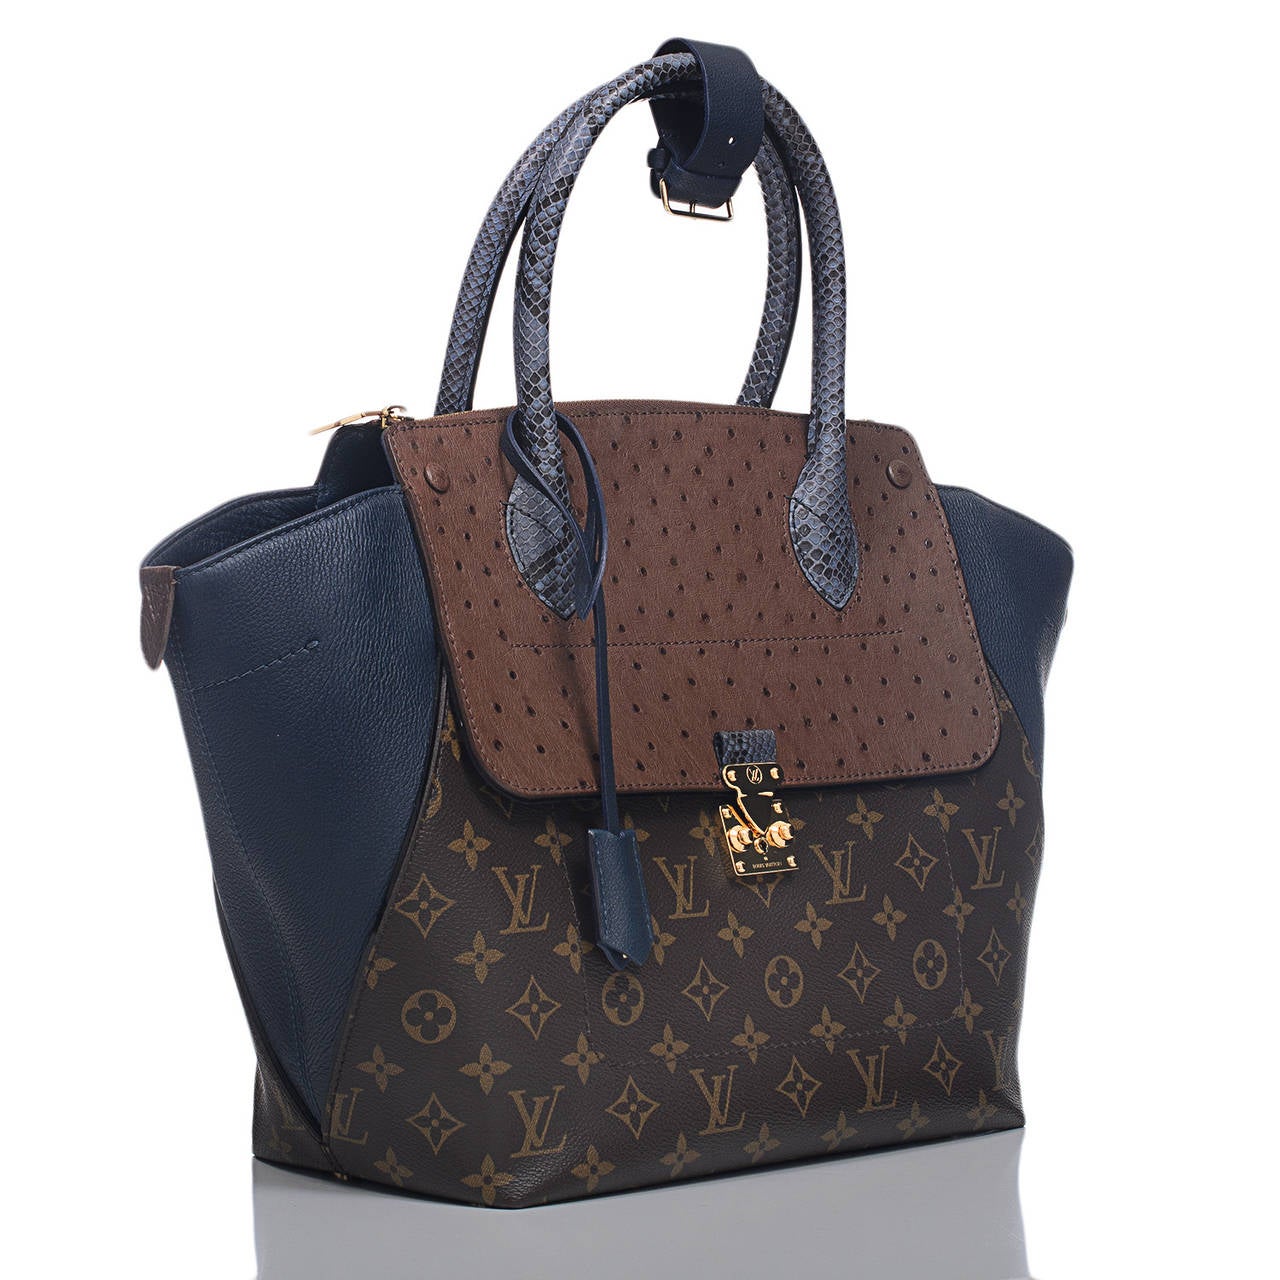 Louis Vuitton Bleu Exotic Monogram Majestueux MM Tote with golden brass hardware.

This chic shopper features coated canvas with expandable blue calfksin leather sides, ostrich trim, double rolled python handles, and an external front pocket with